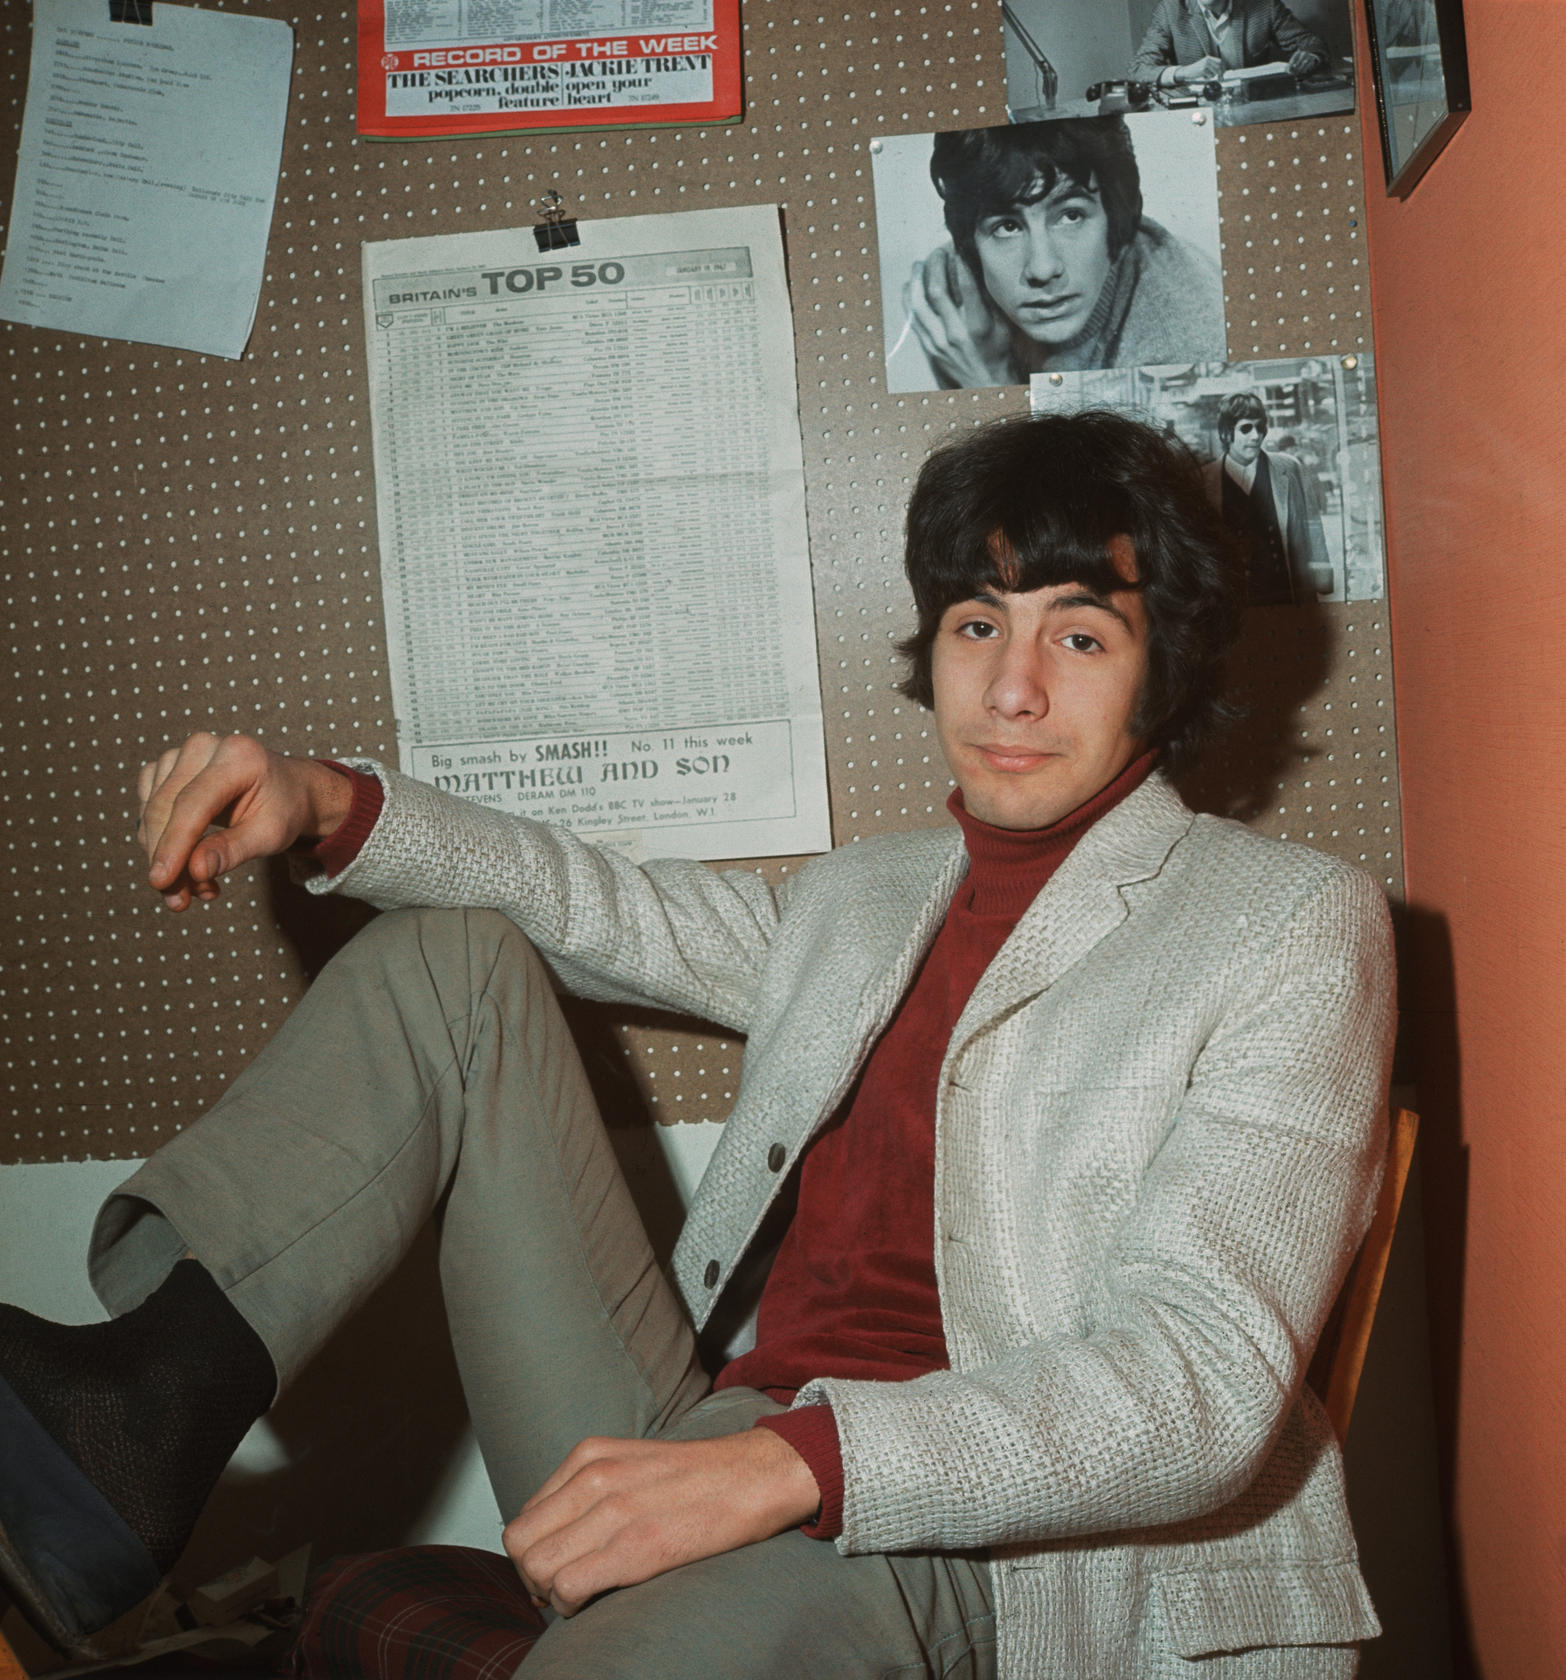 Under the stage name Cat Stevens, Yusuf achieved chart success in 1970. Photos: Corbis